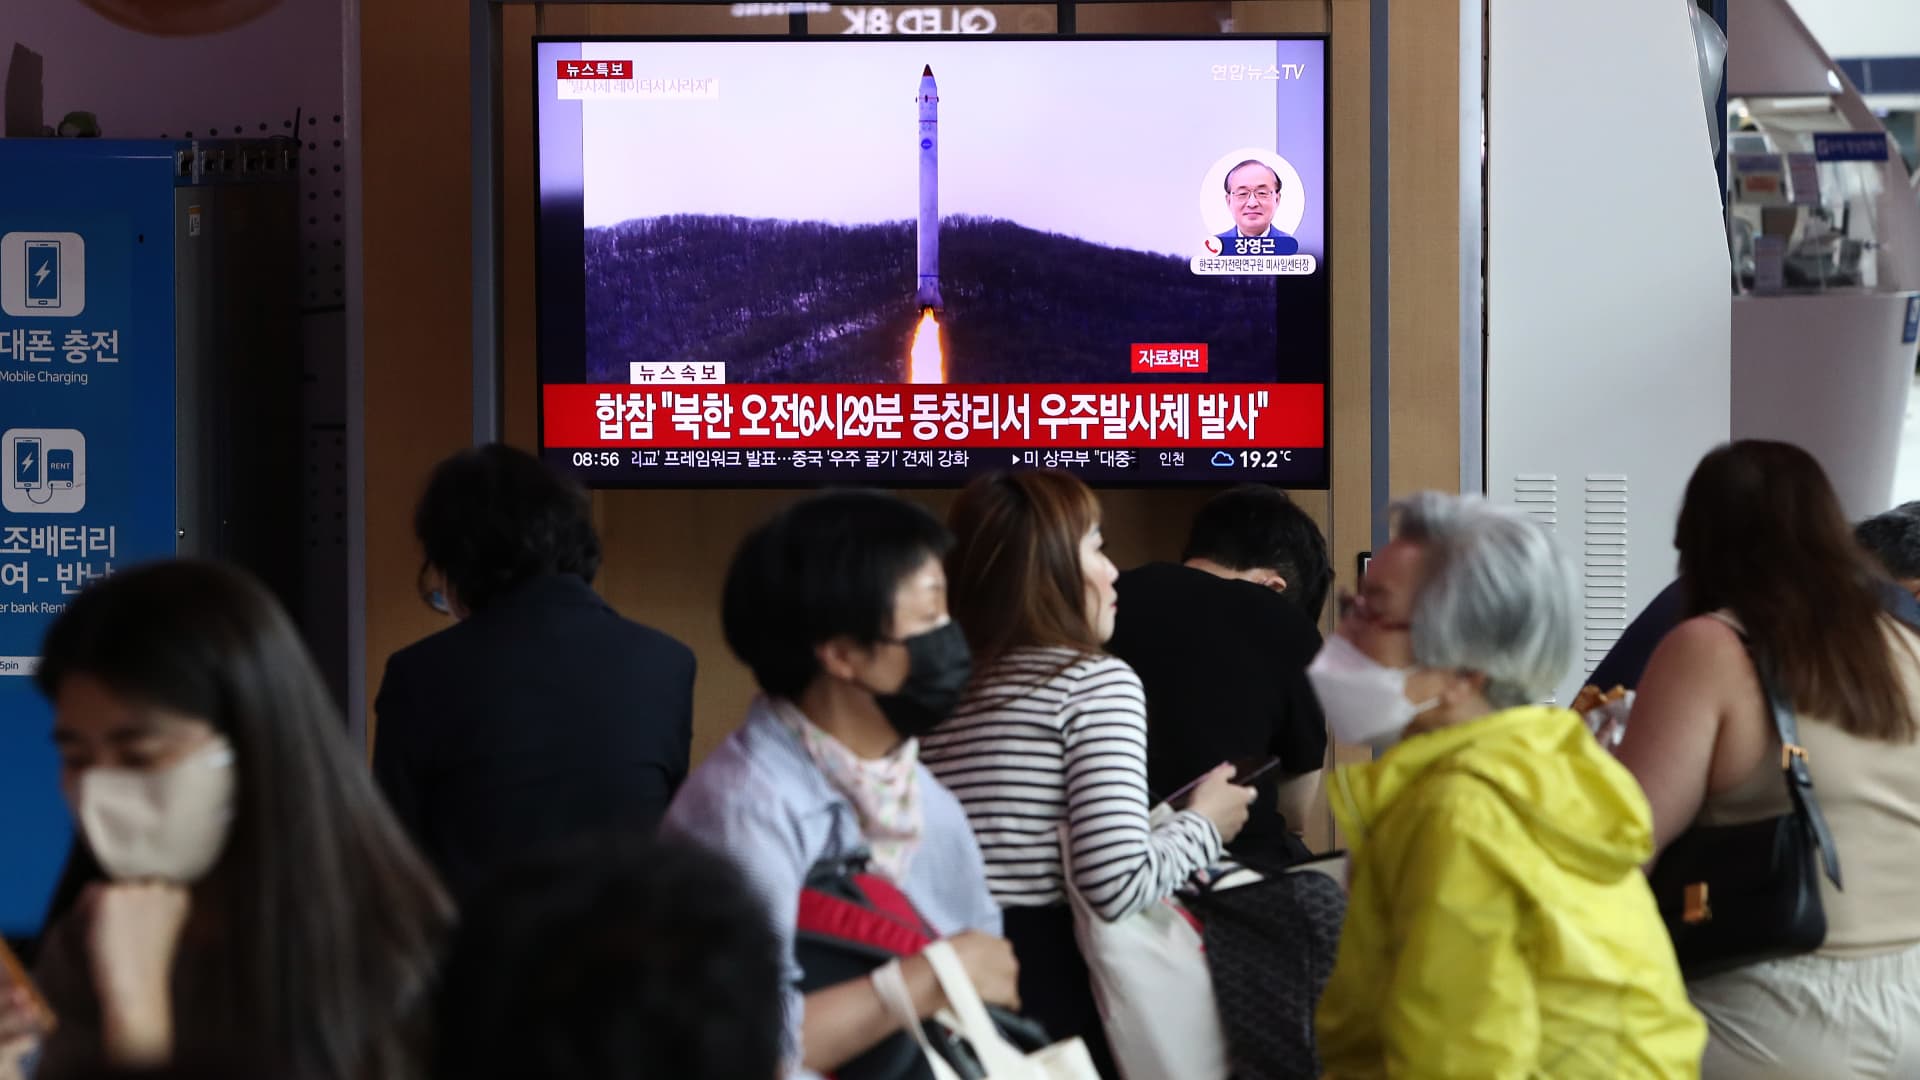 North Korea has ‘no curiosity’ in nuclear talks with the U.S., says think tank